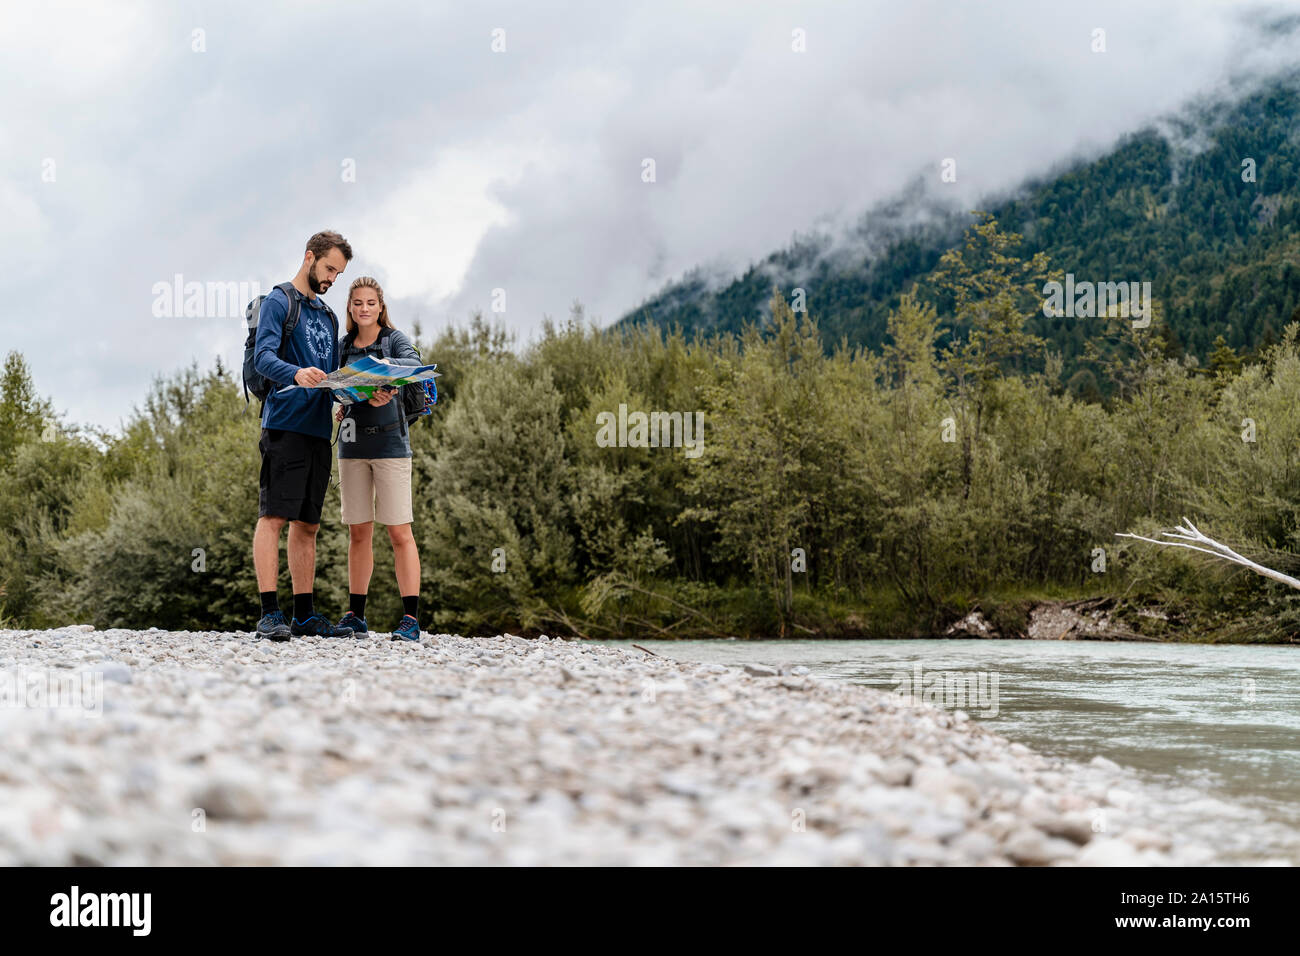 Young couple on a hiking trip at riverside reading map, Vorderriss, Bavaria, Germany Stock Photo